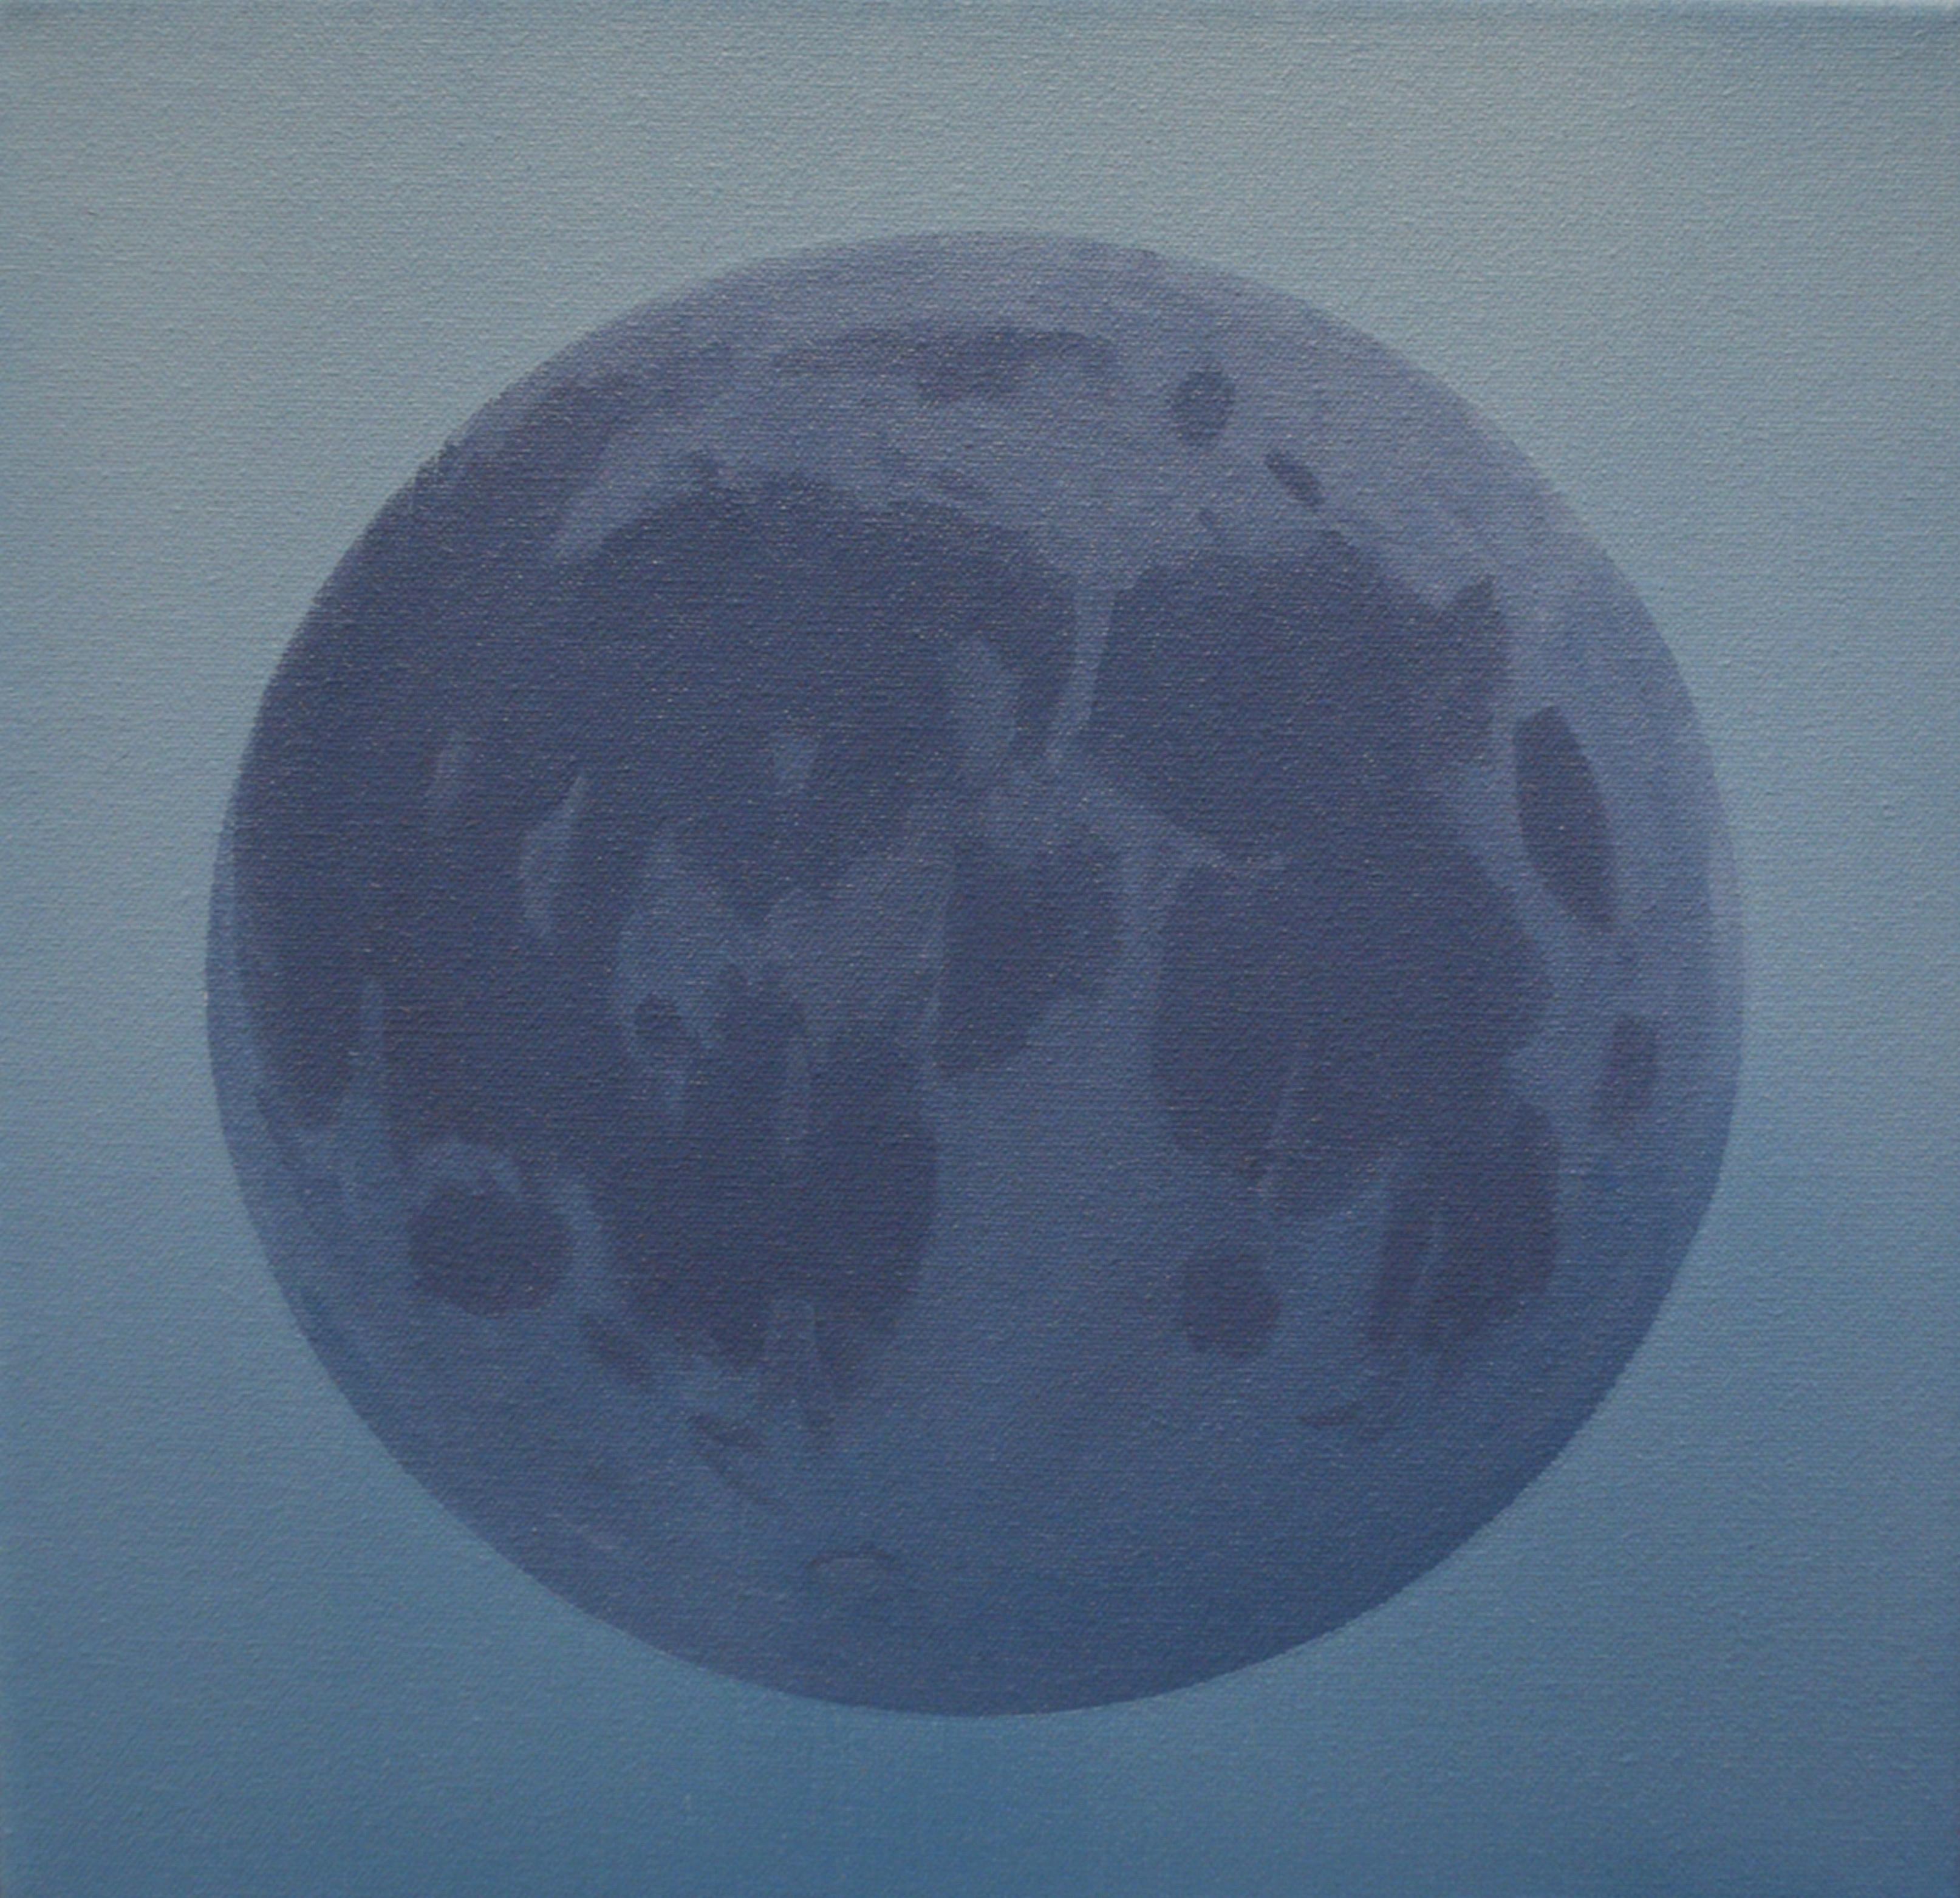 Moon 7 - Painting by Beau Carey